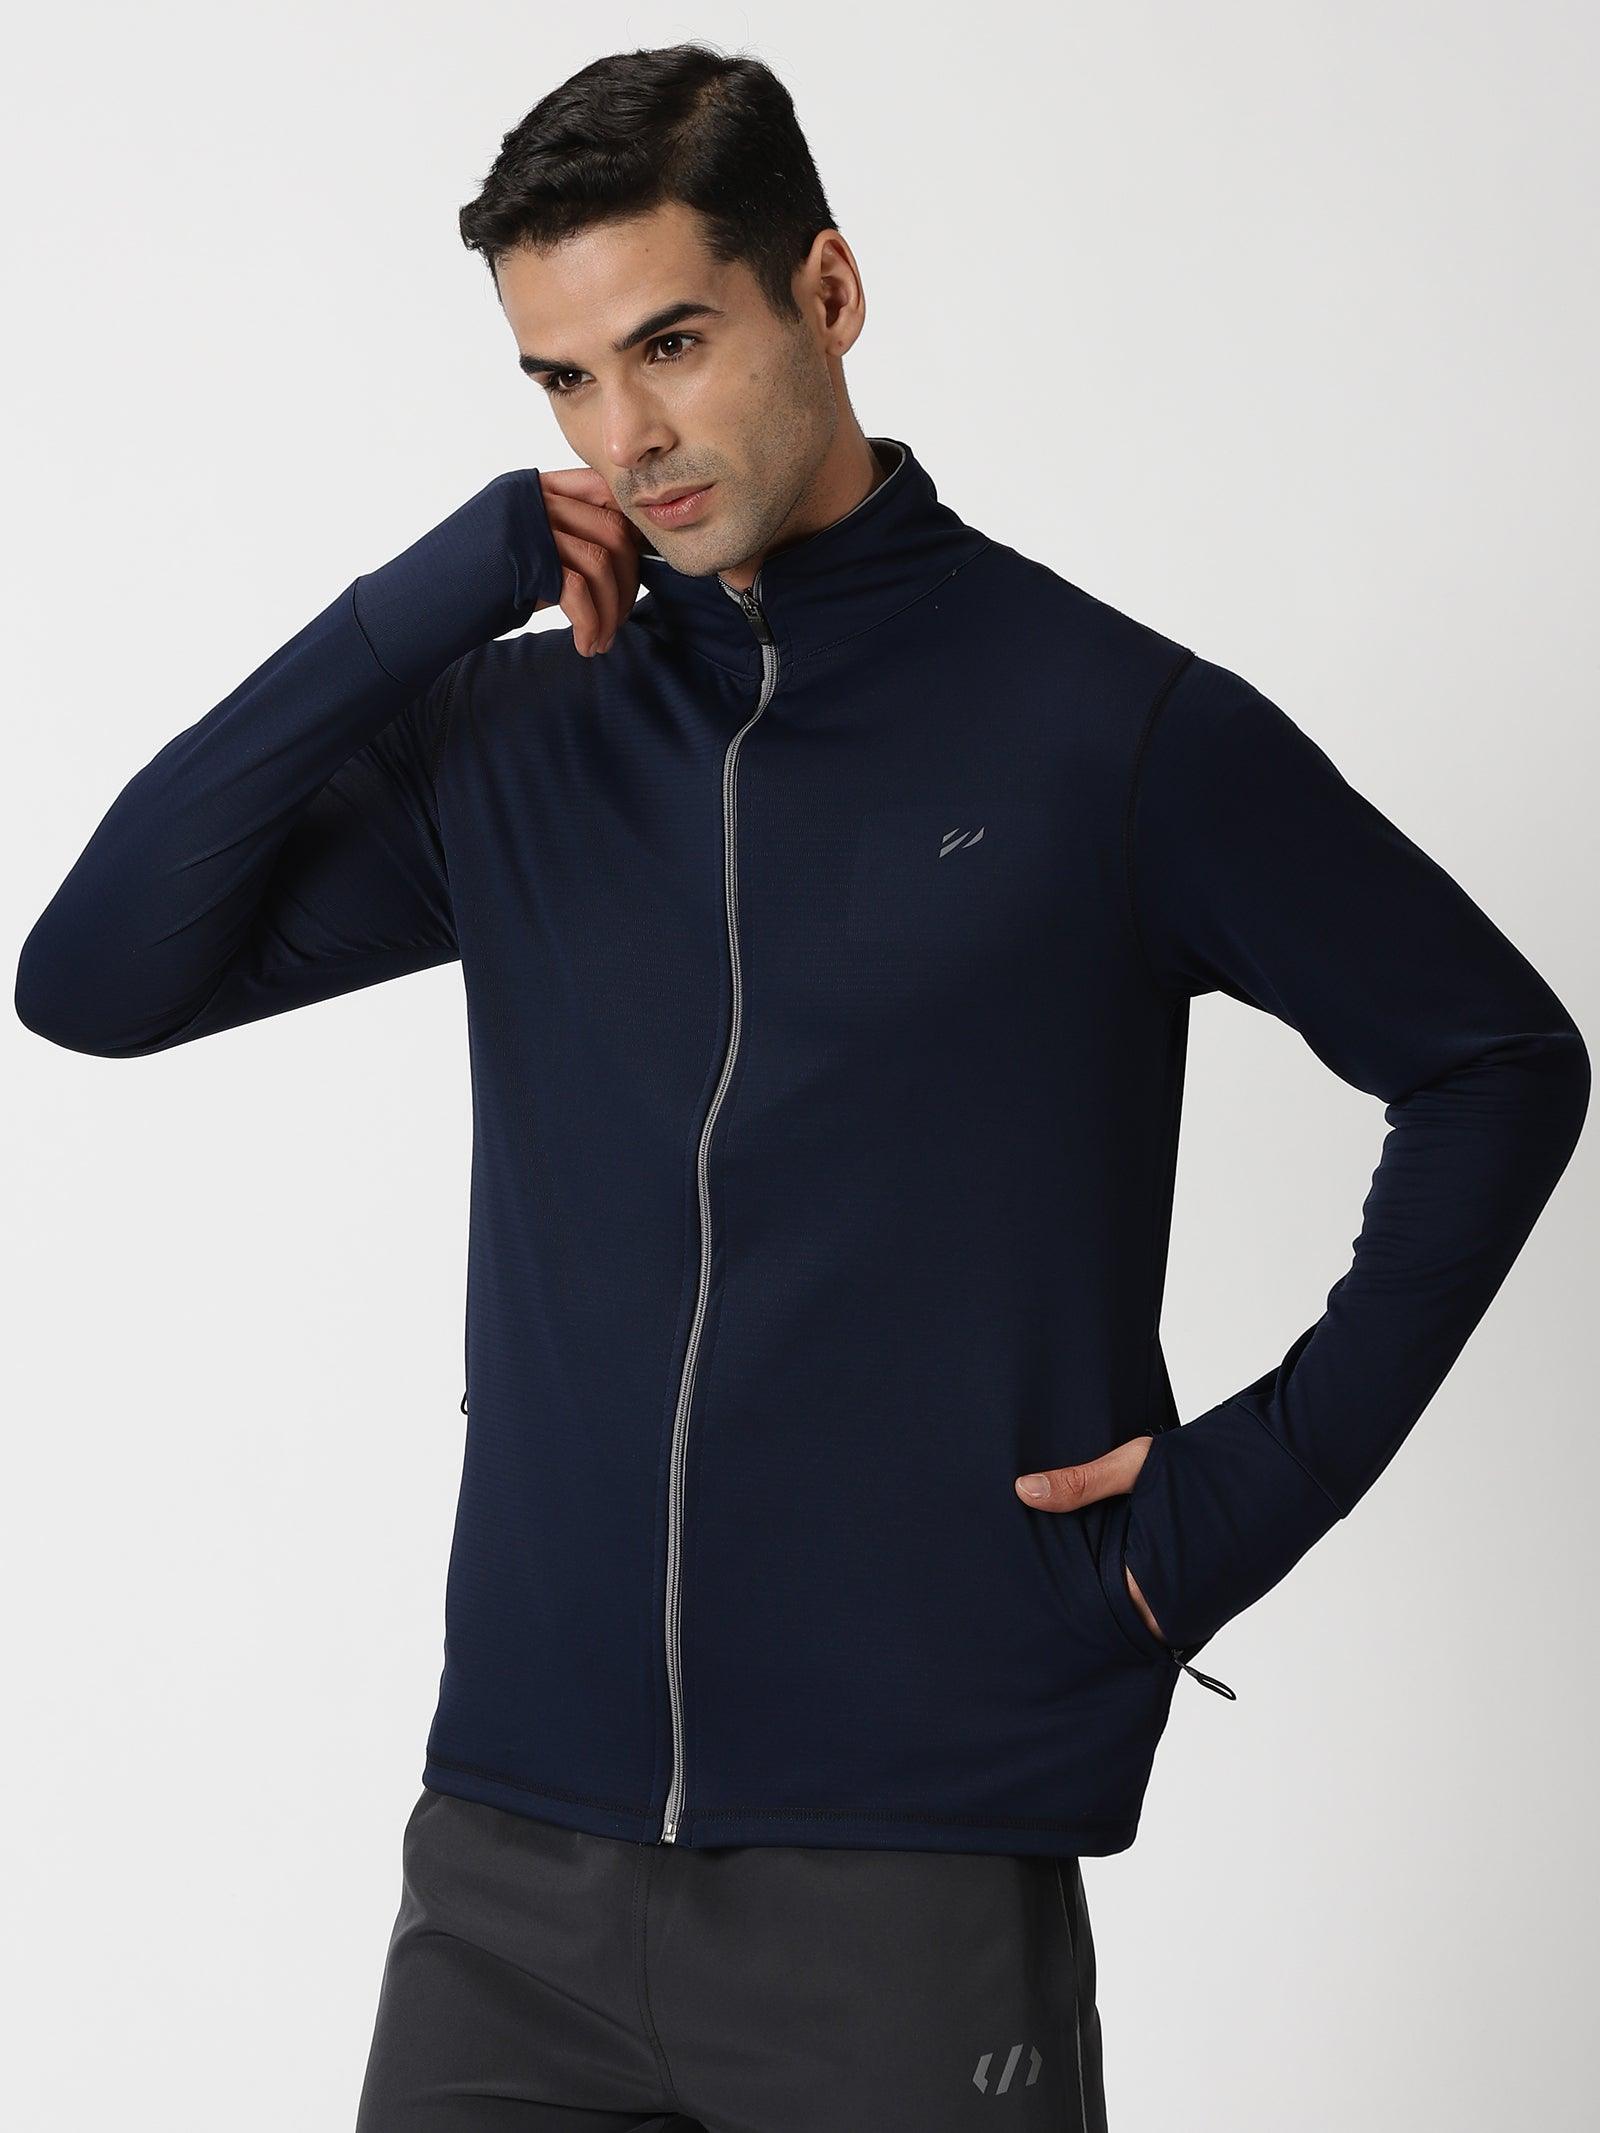 Sunscreen Jacket - The Ultimate Sun Protection Wear NAVY / M